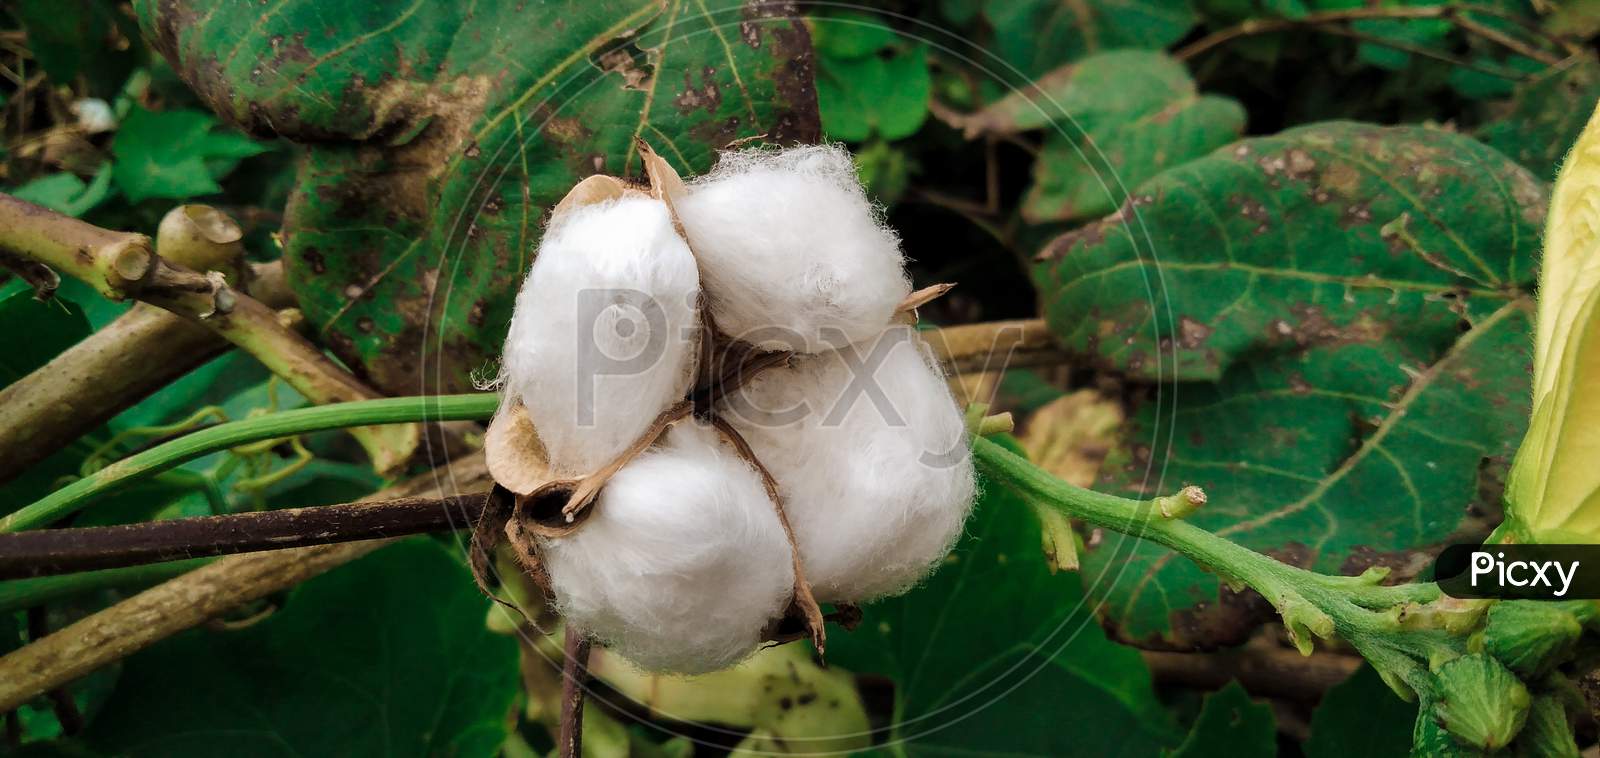 Blooming cotton